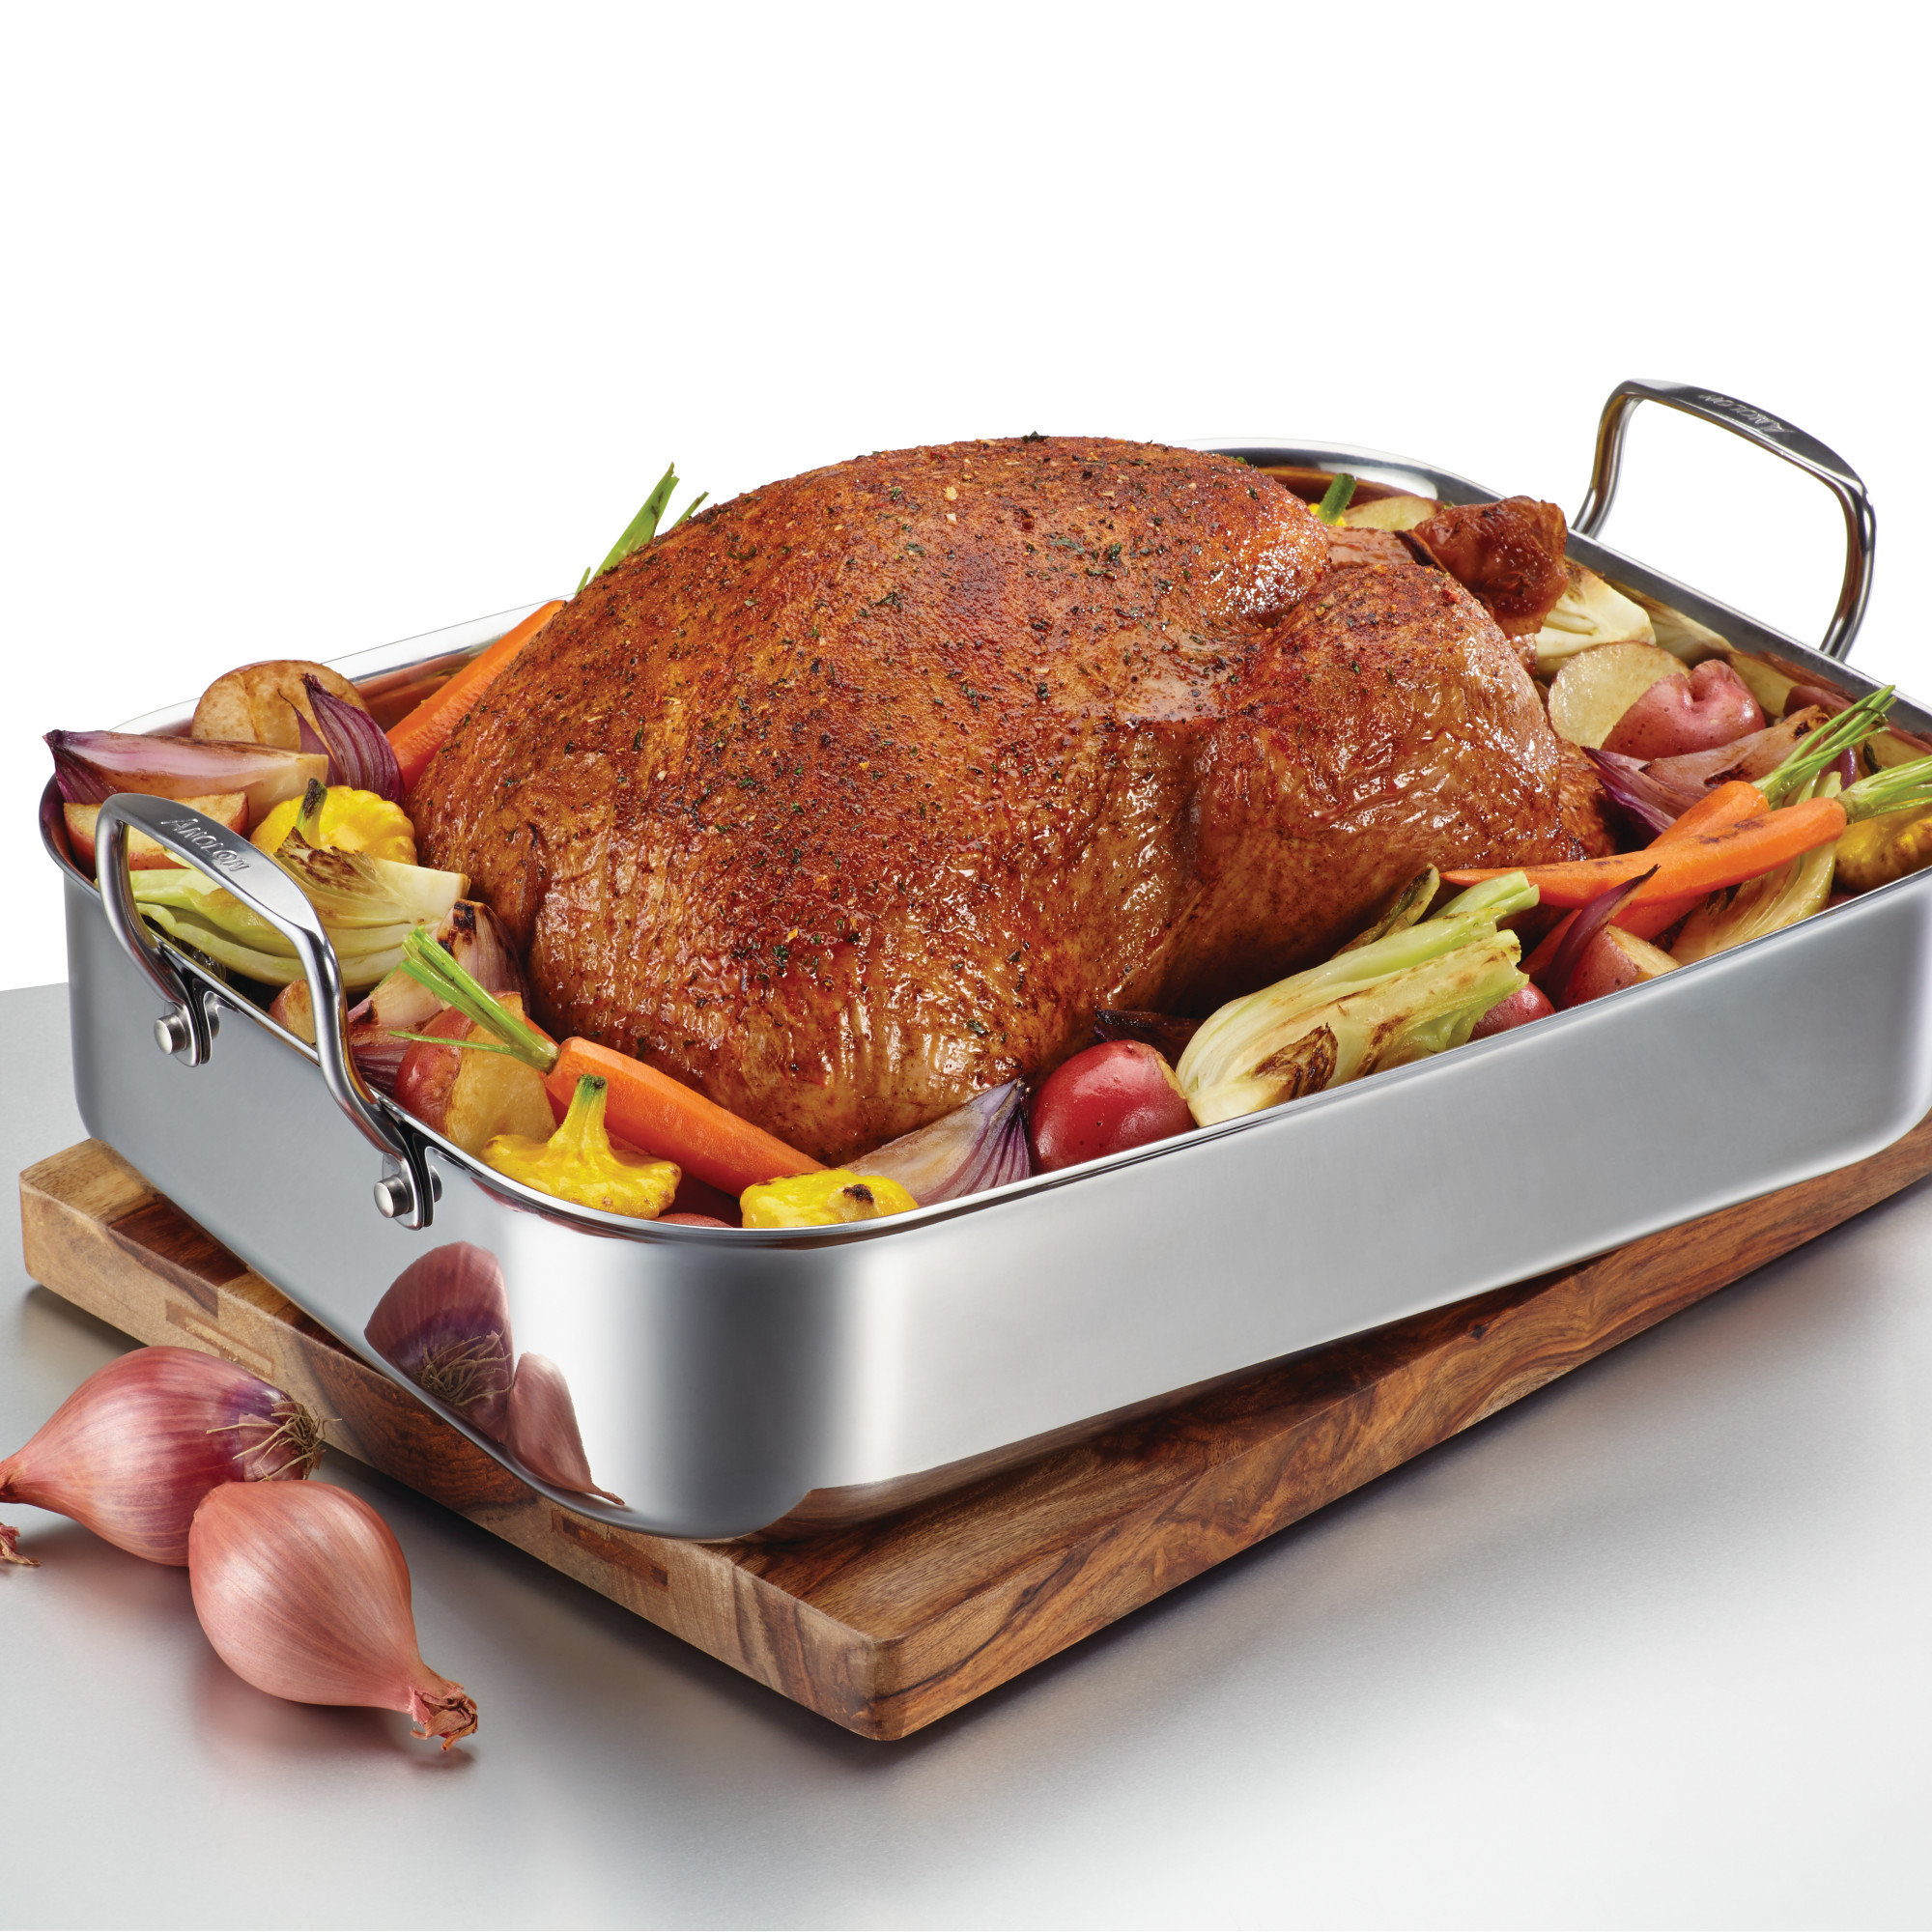 Anolon Tri-Ply Clad Stainless Steel 17-inch x 12.5-inch Rectangular Roaster with Nonstick Rack